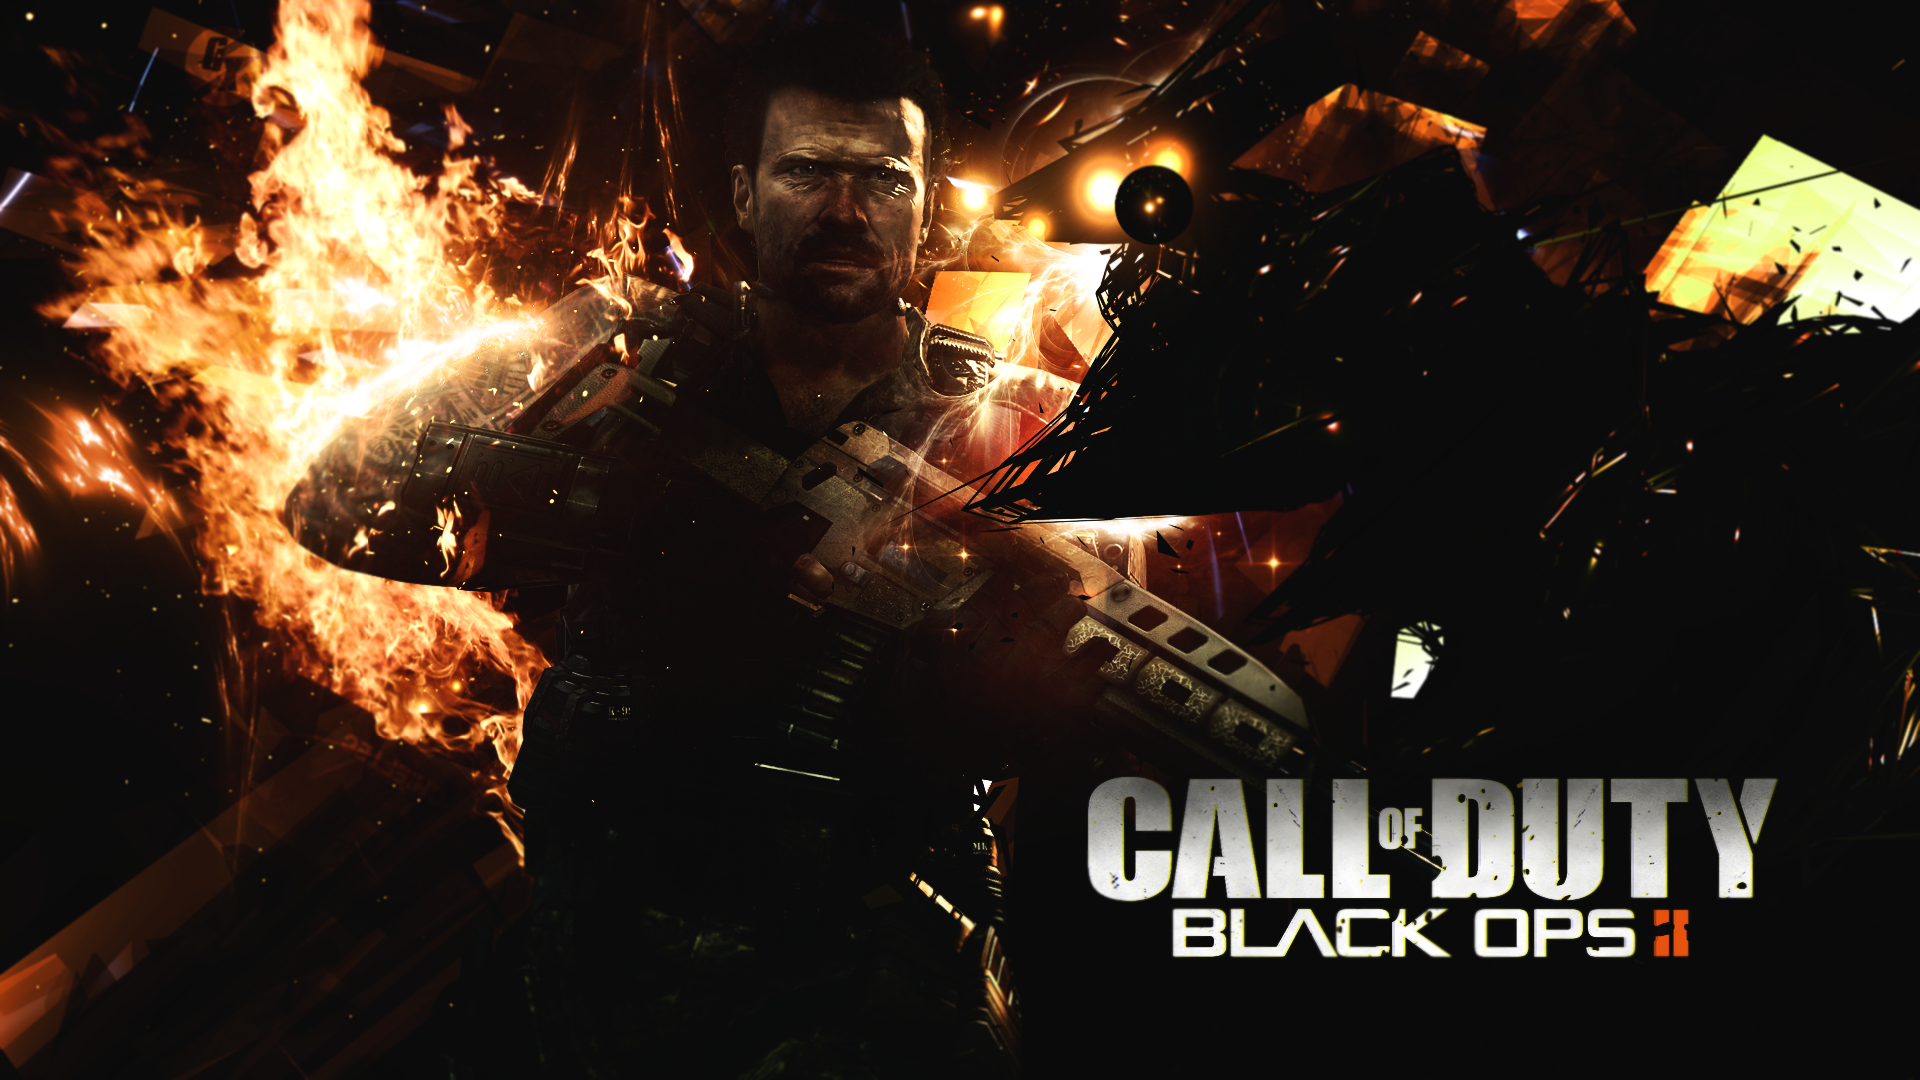 HD Black Ops 2 Backgrounds